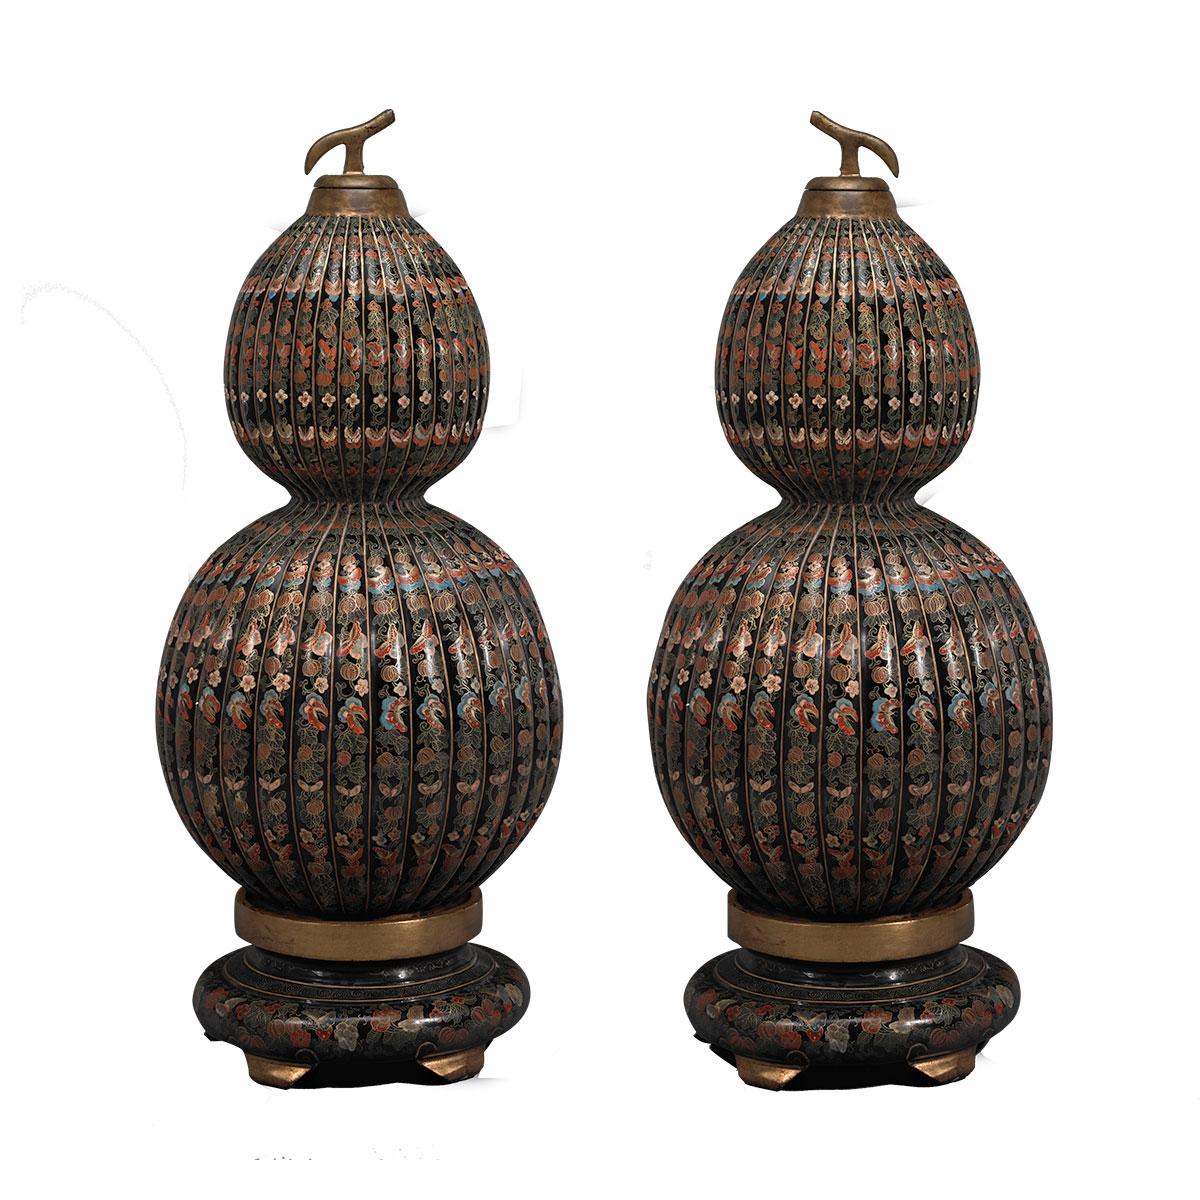 Pair of Large Lacquer and Gilt Painted Double Gourd Containers, Mid 20th Century